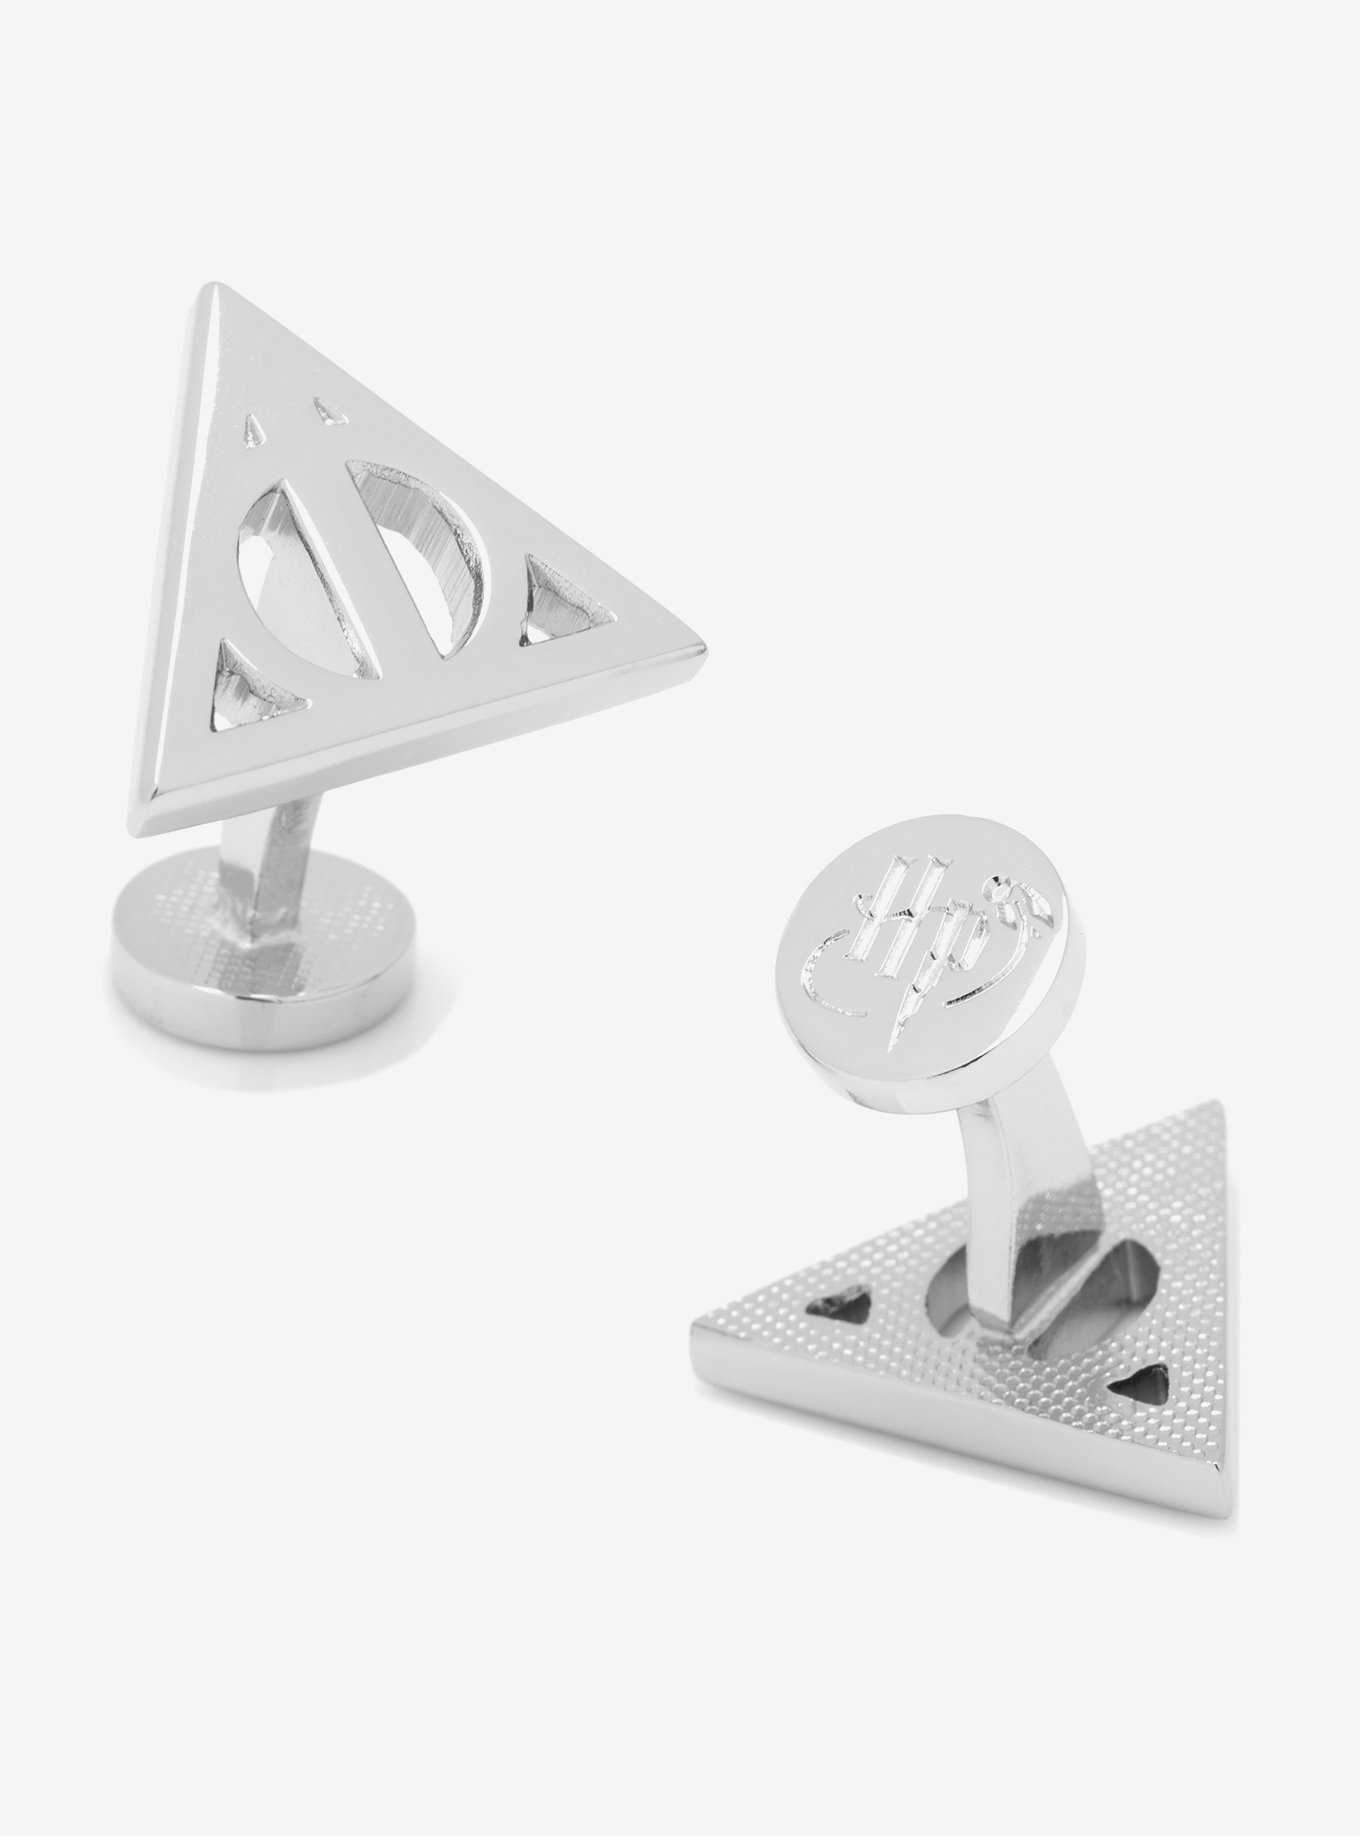 Harry Potter Deathly Hallows Silver Cufflinks, , hi-res